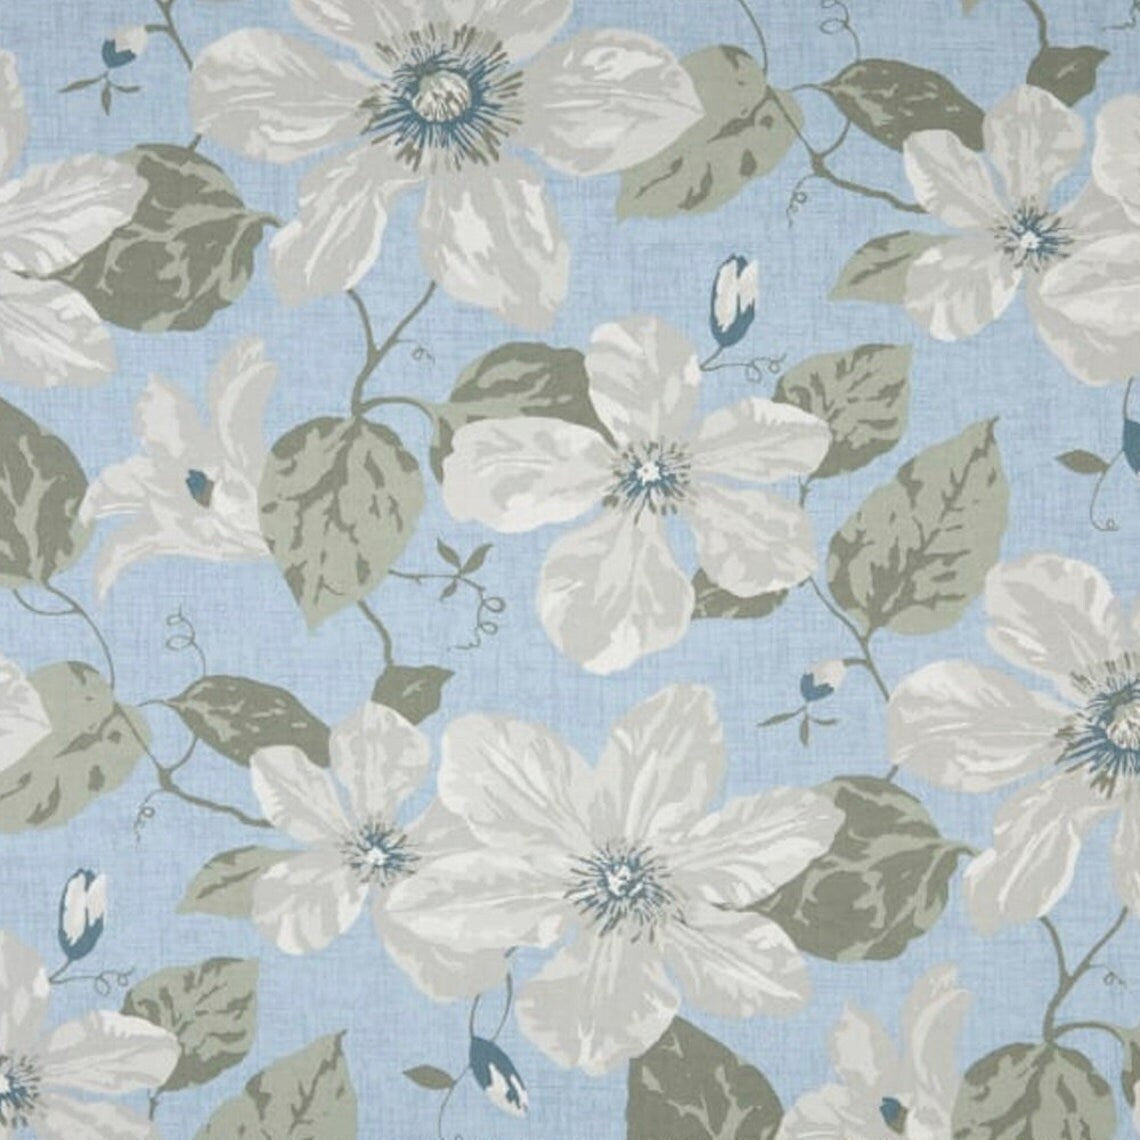 tailored crib skirt in nelly antique blue floral, large scale